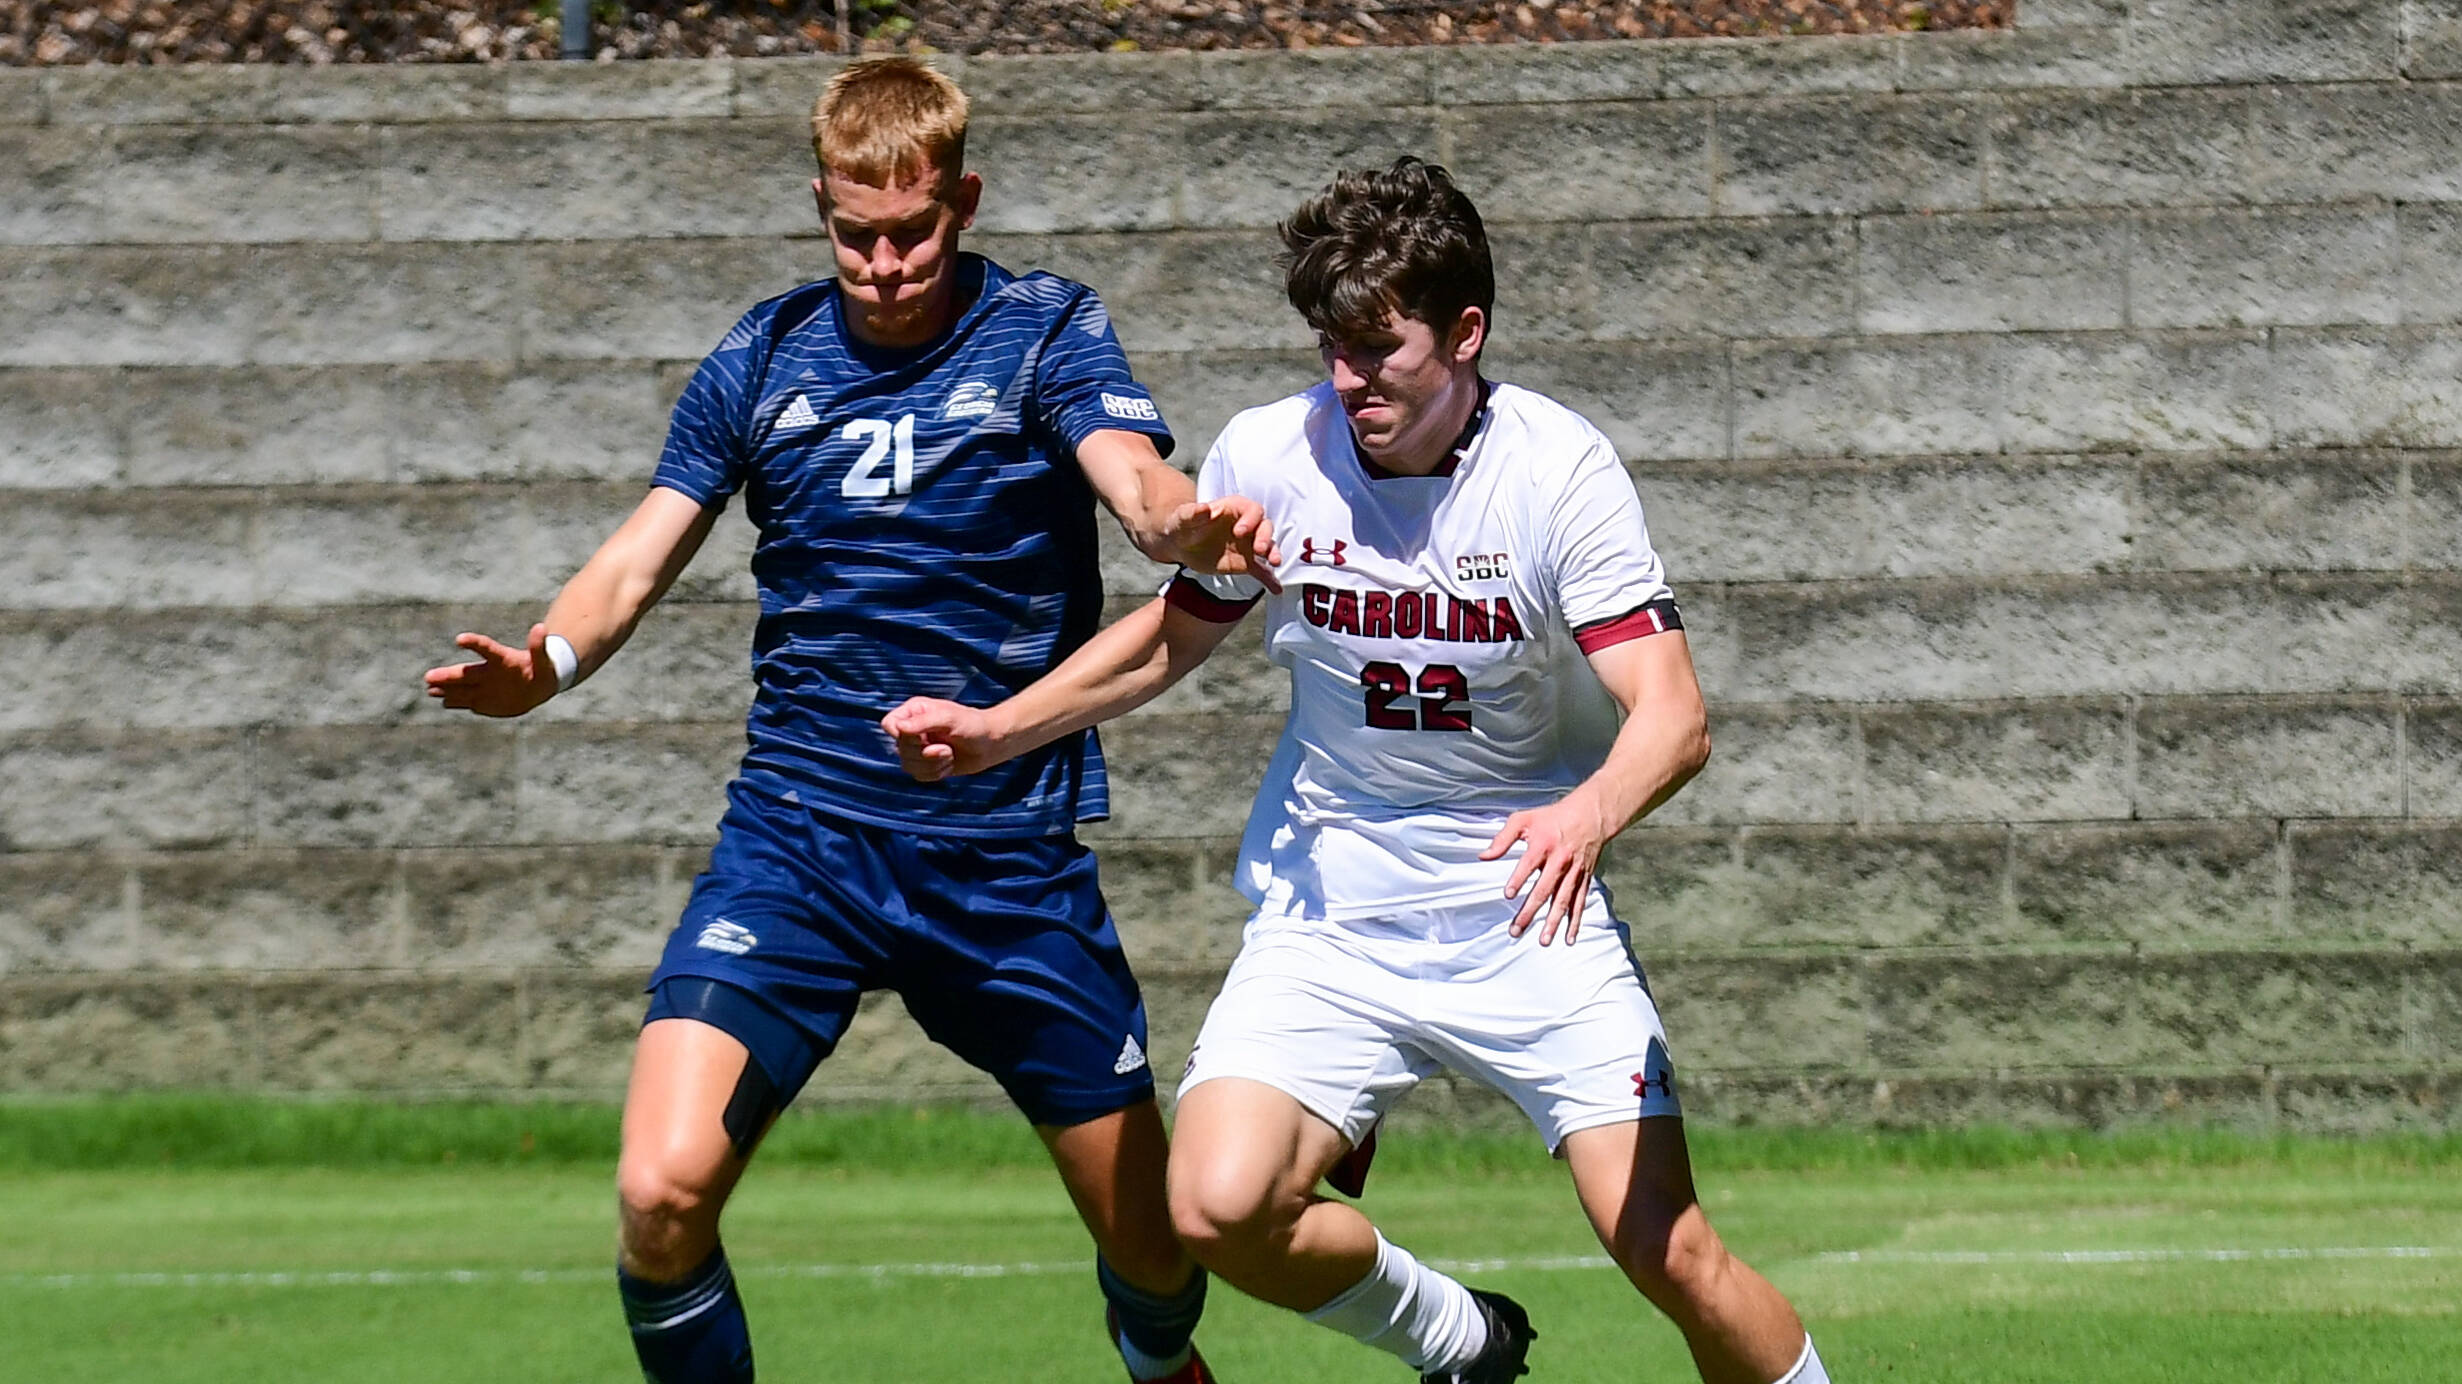 Men’s Soccer Wraps Up Road Trip at Old Dominion Wednesday